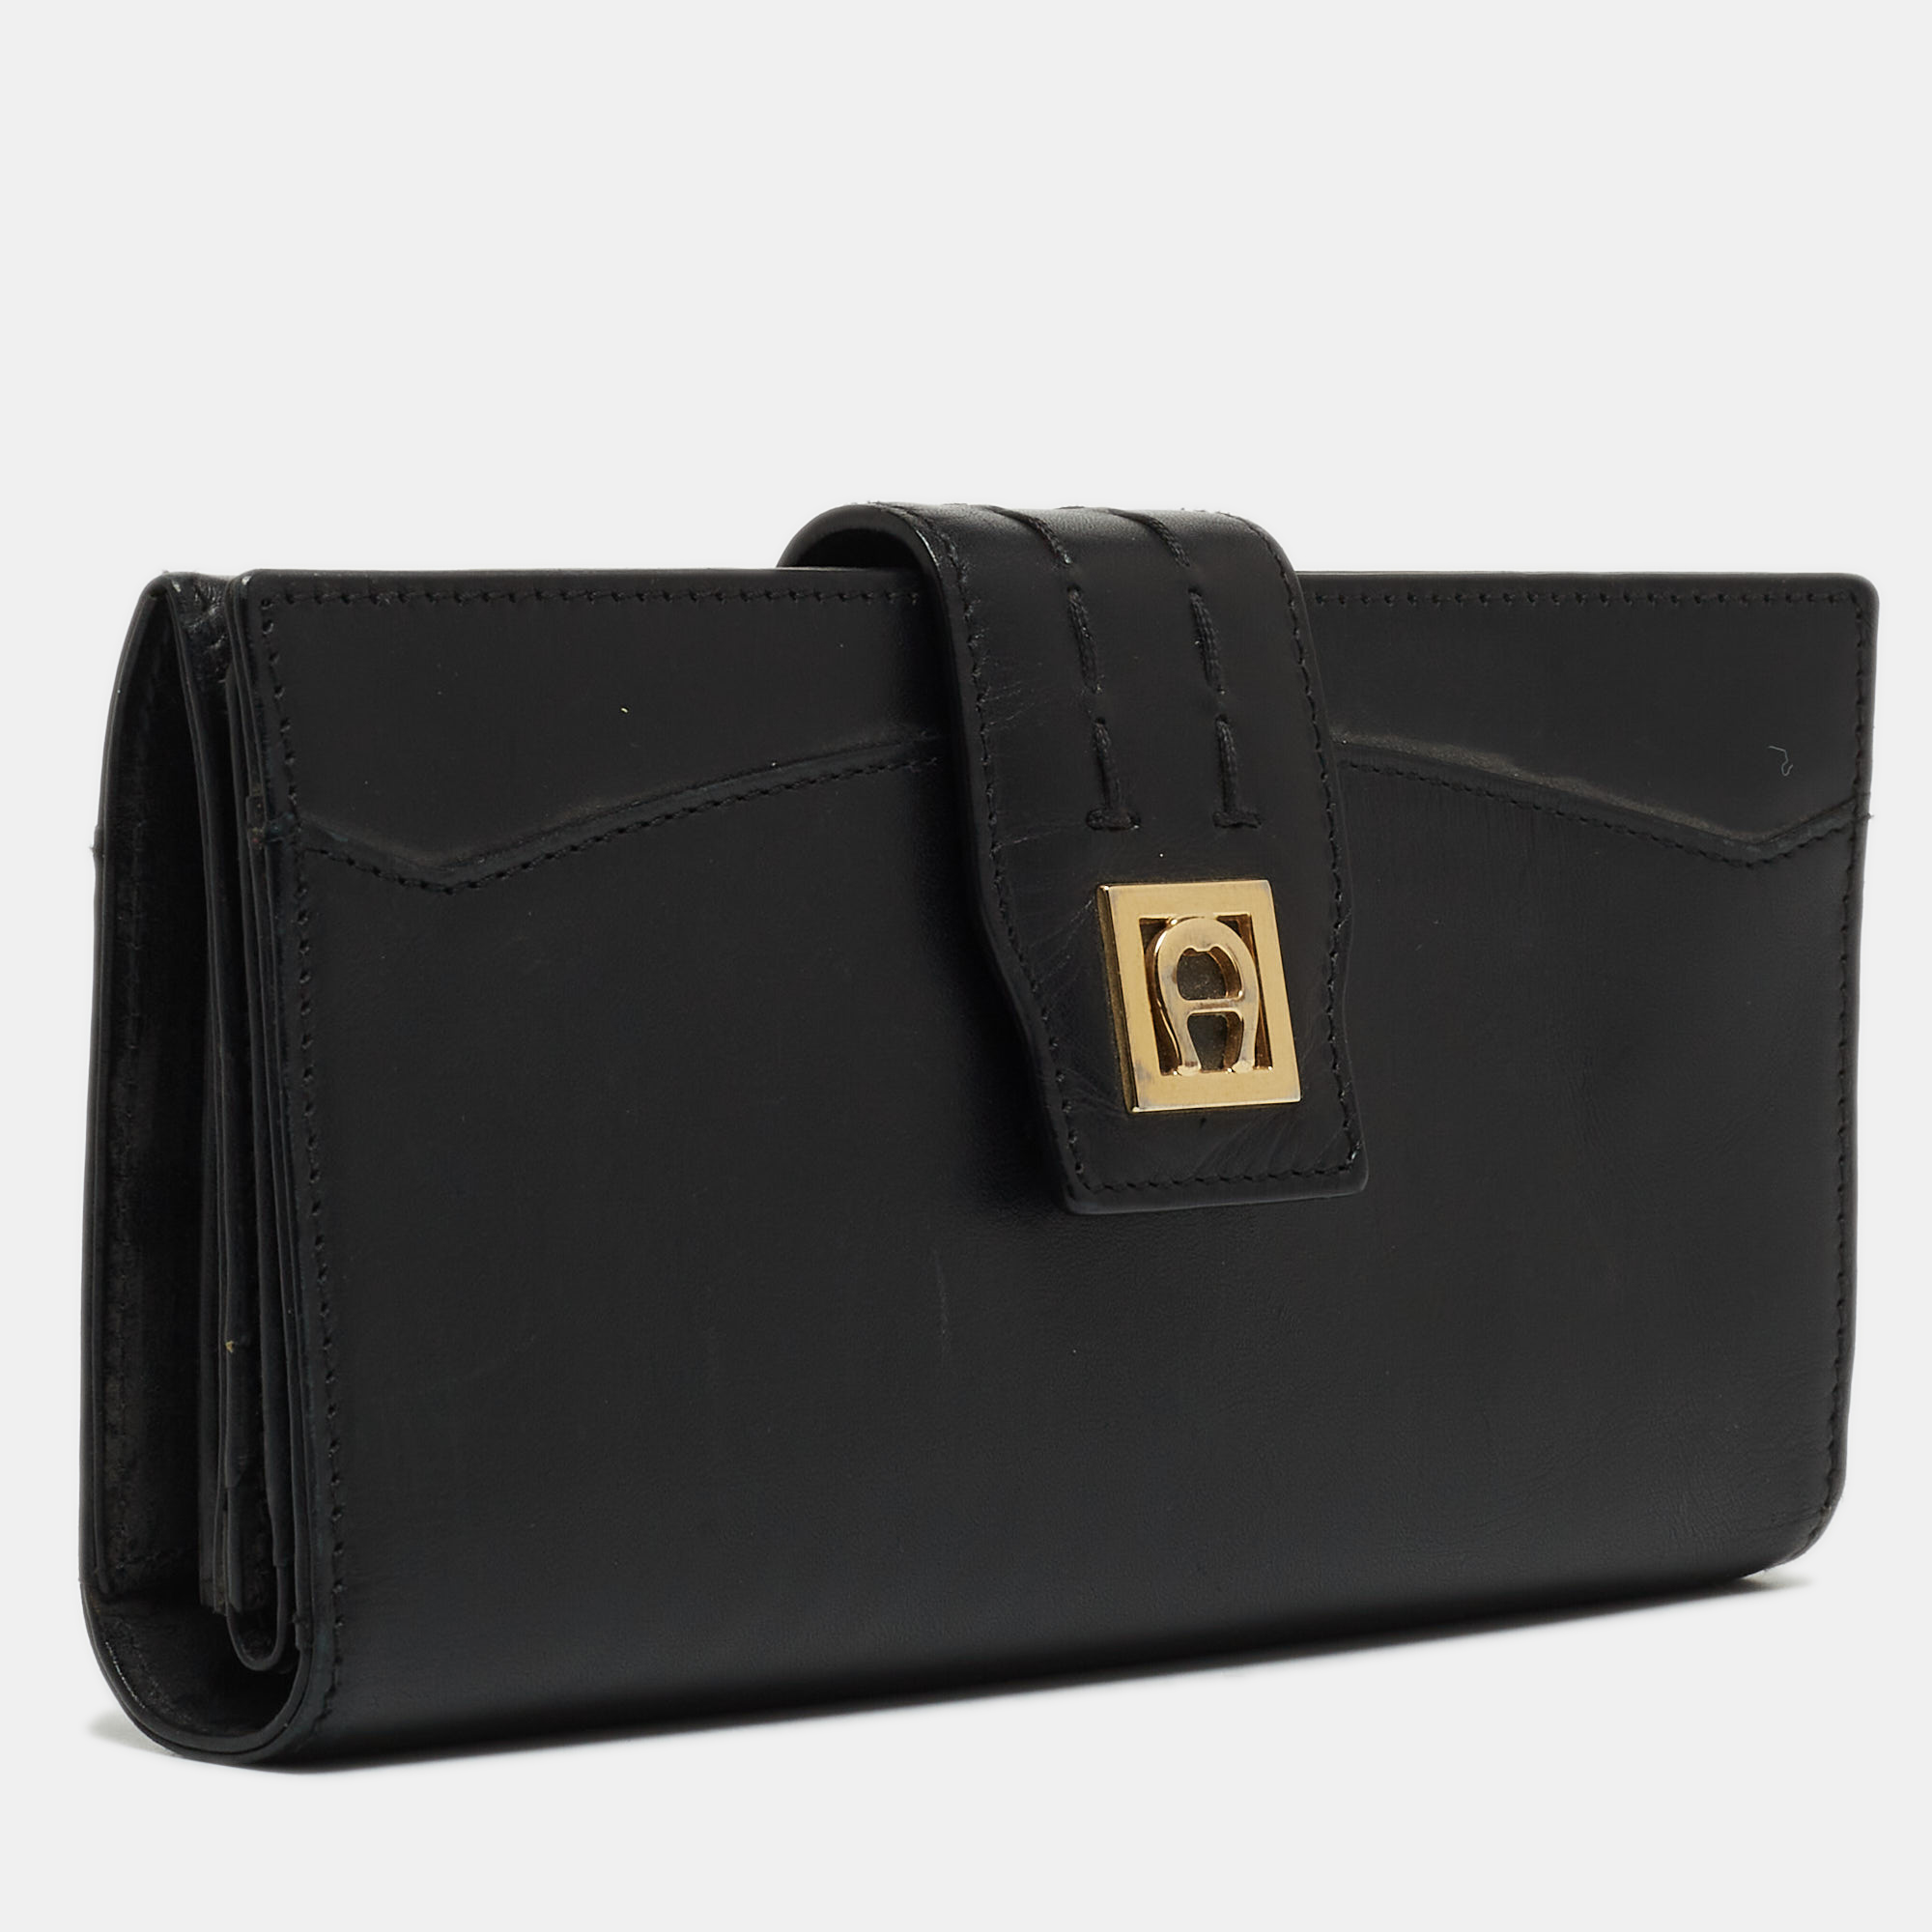 Aigner Black Leather Logo Continental Wallet